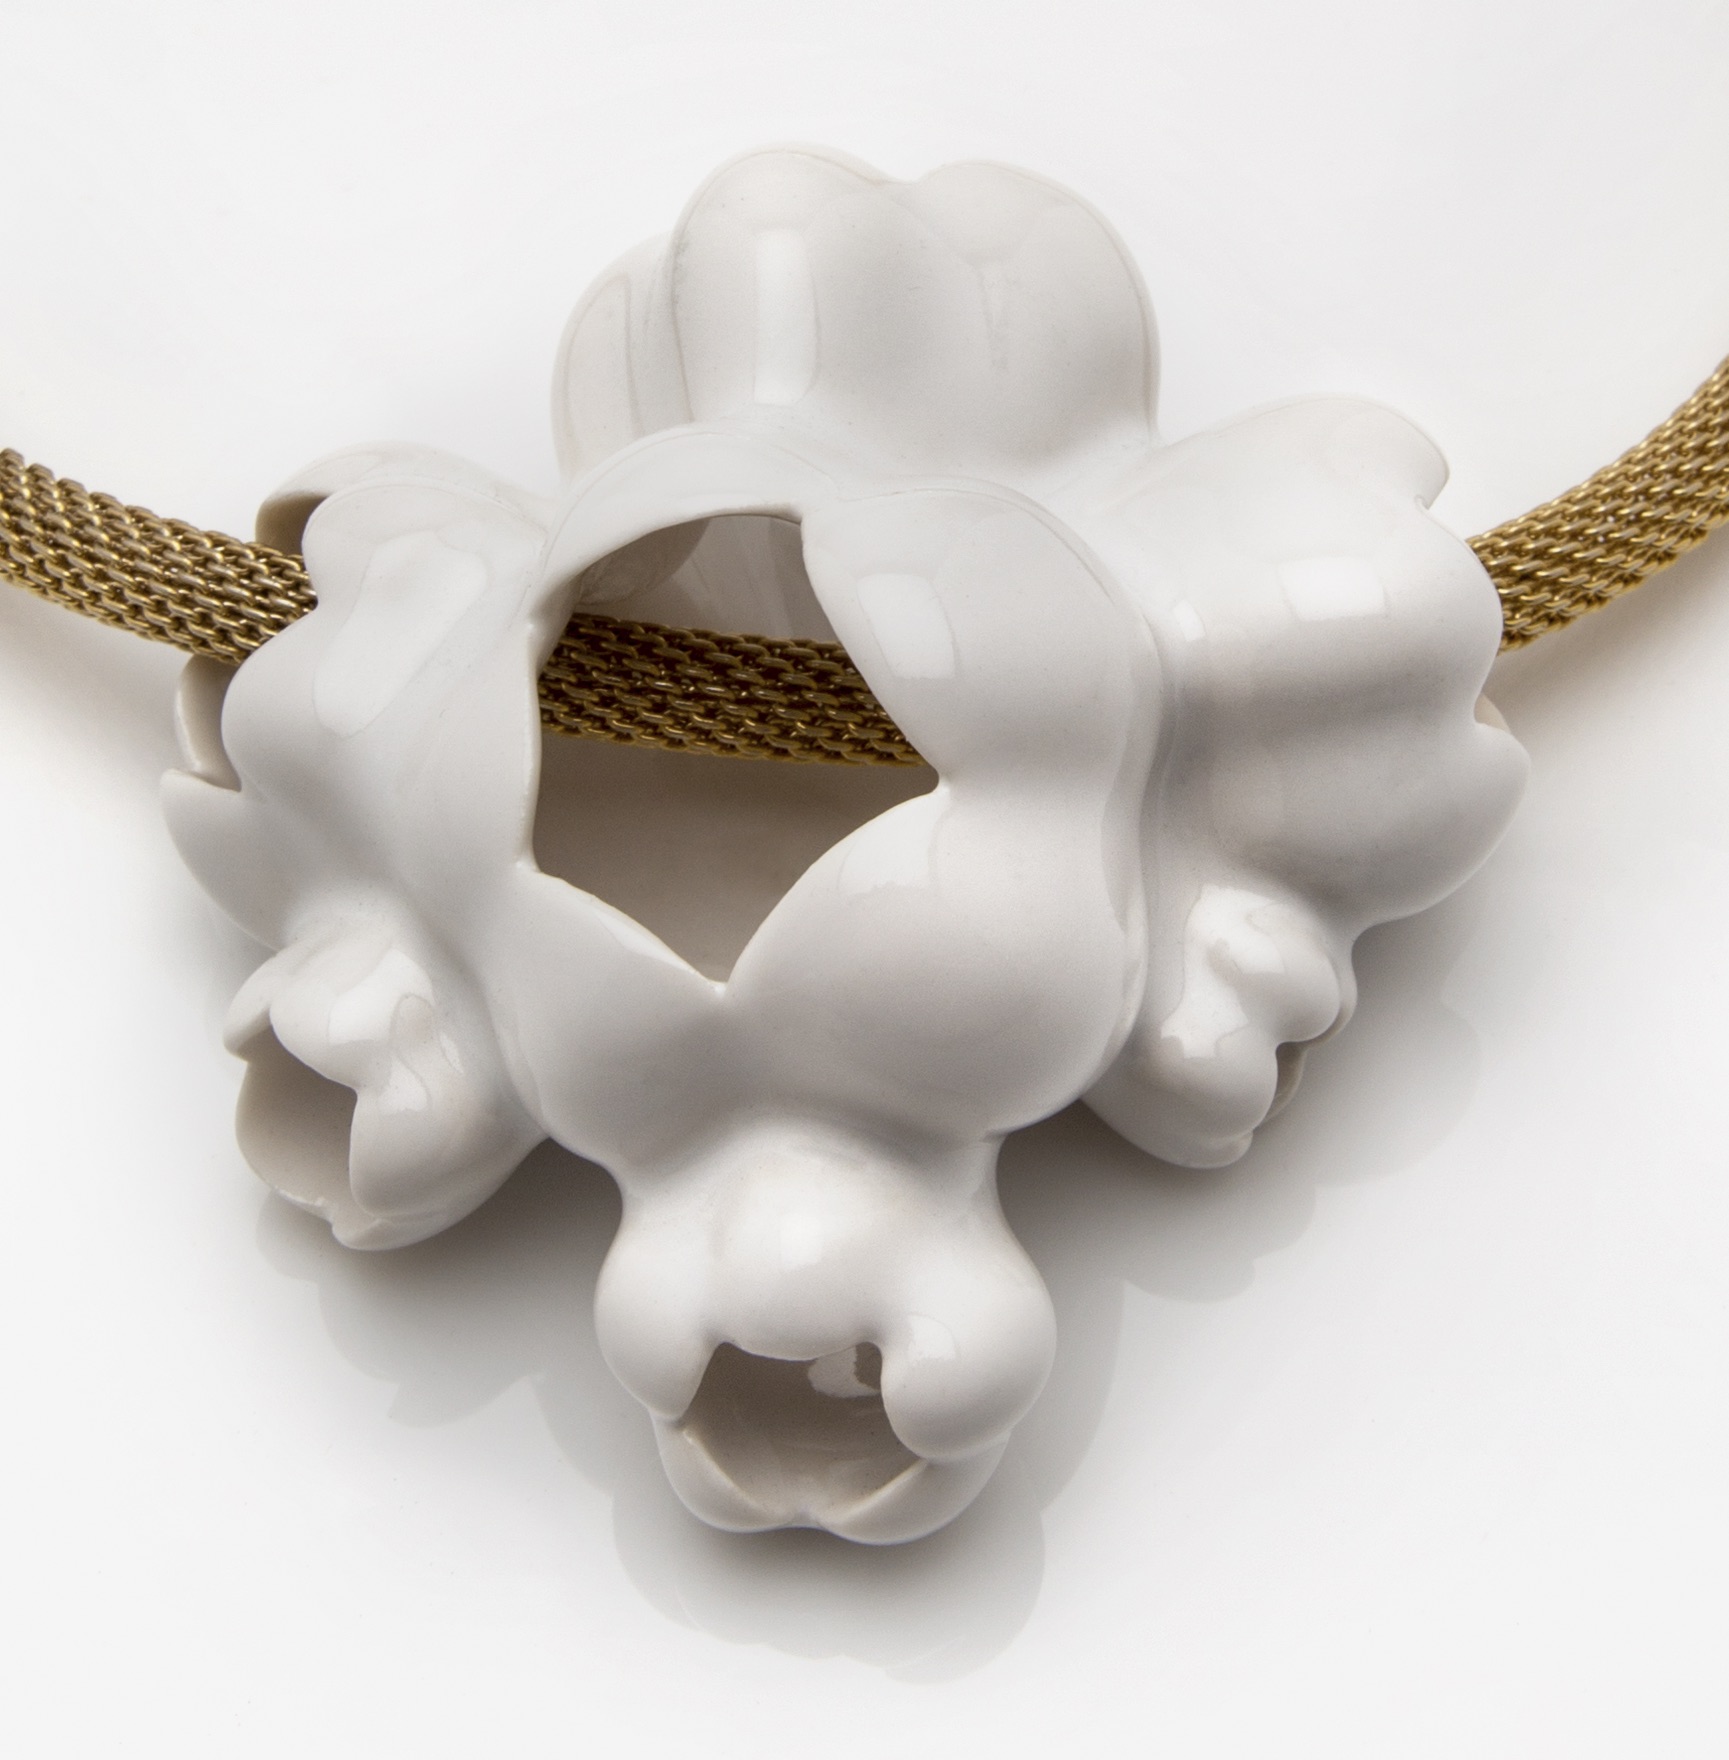 Cloud Fruit necklace by David Wiseman for Cultured. 